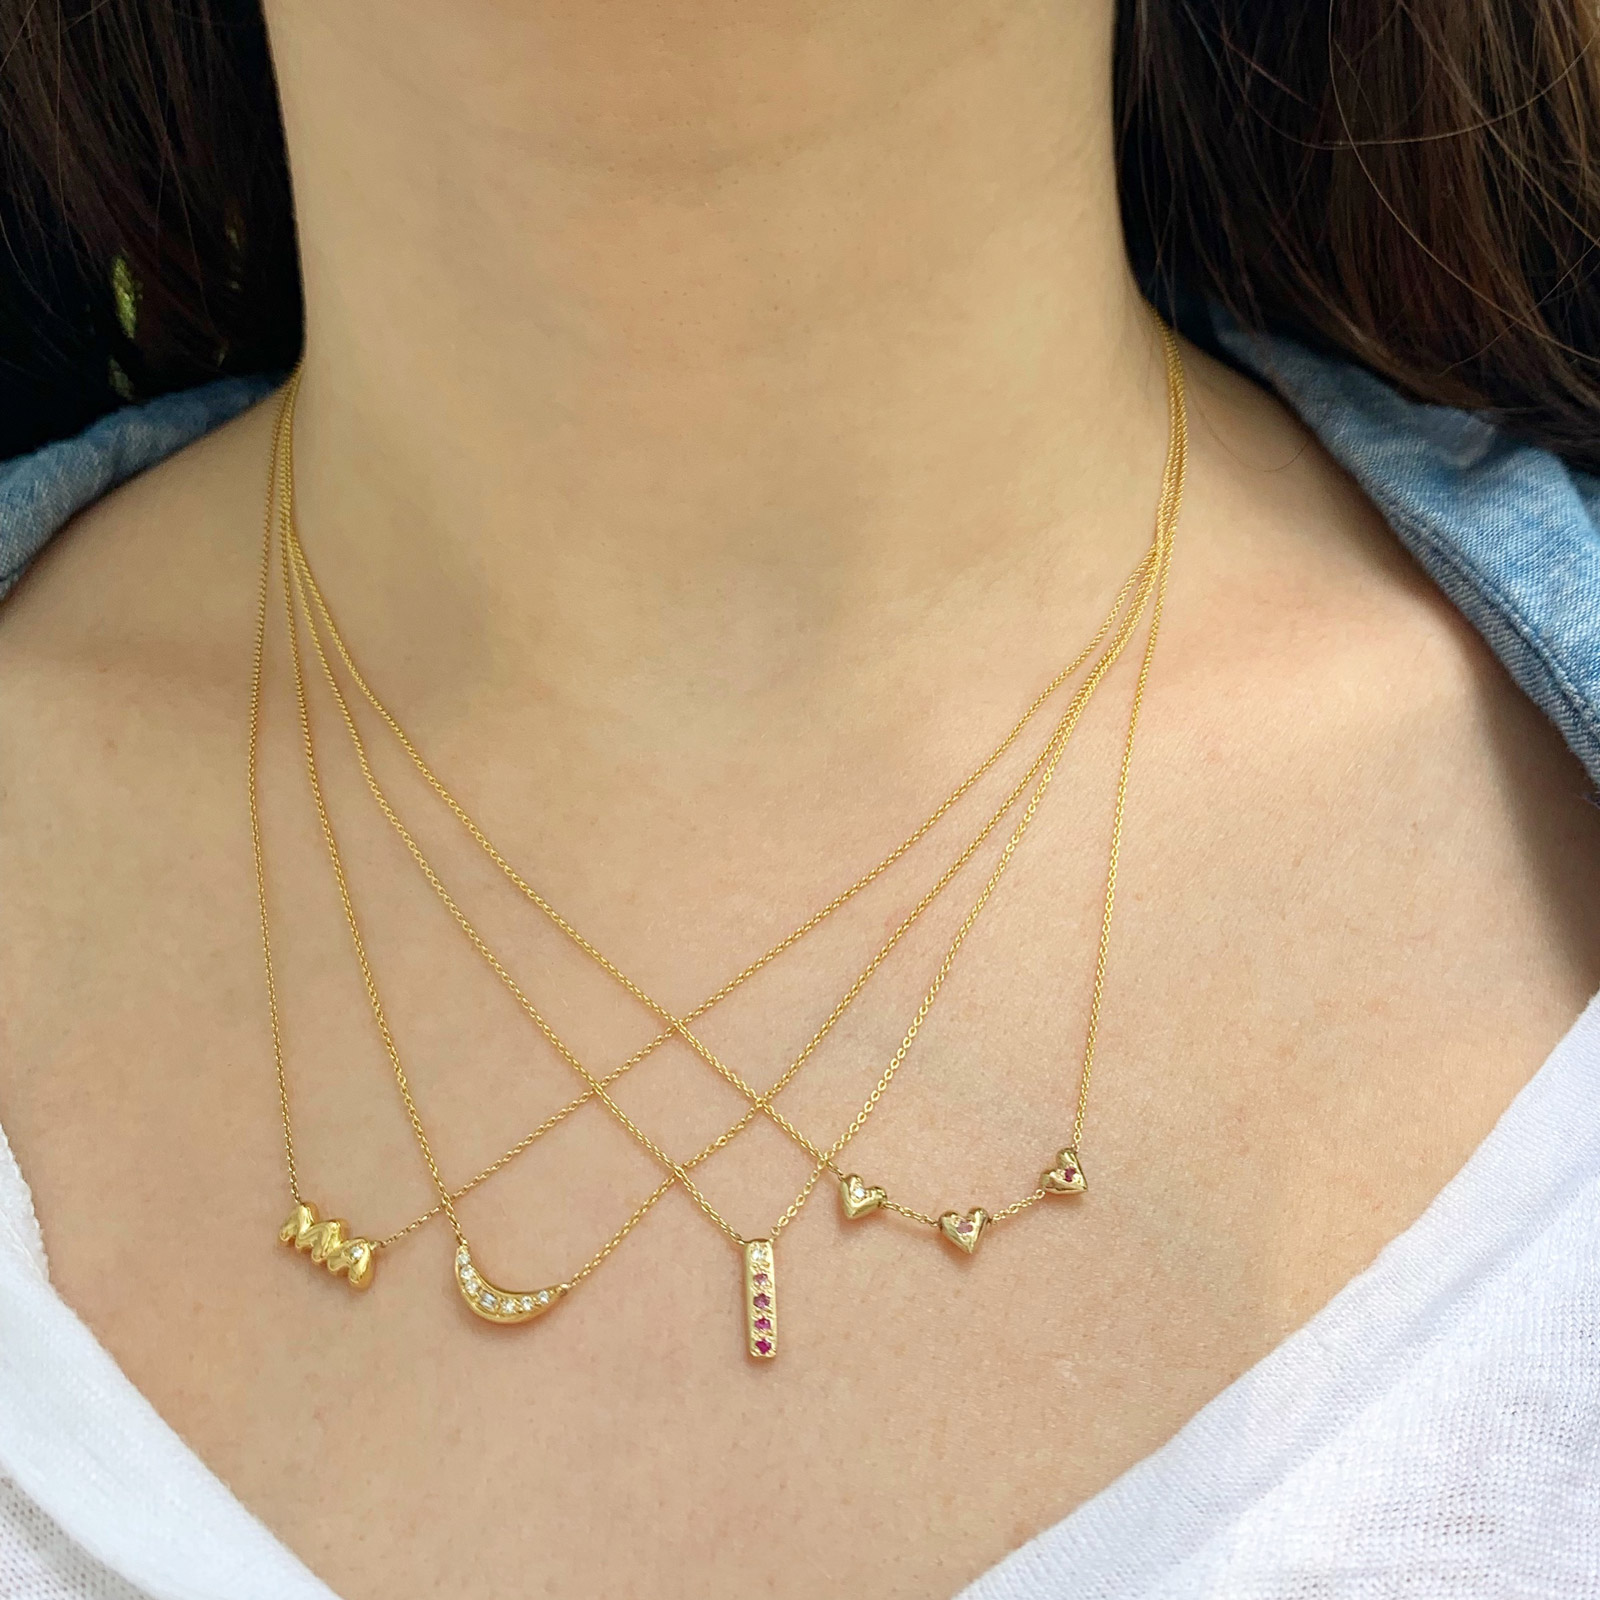 wearing the teeny tiny heart necklace and skinny bar necklace